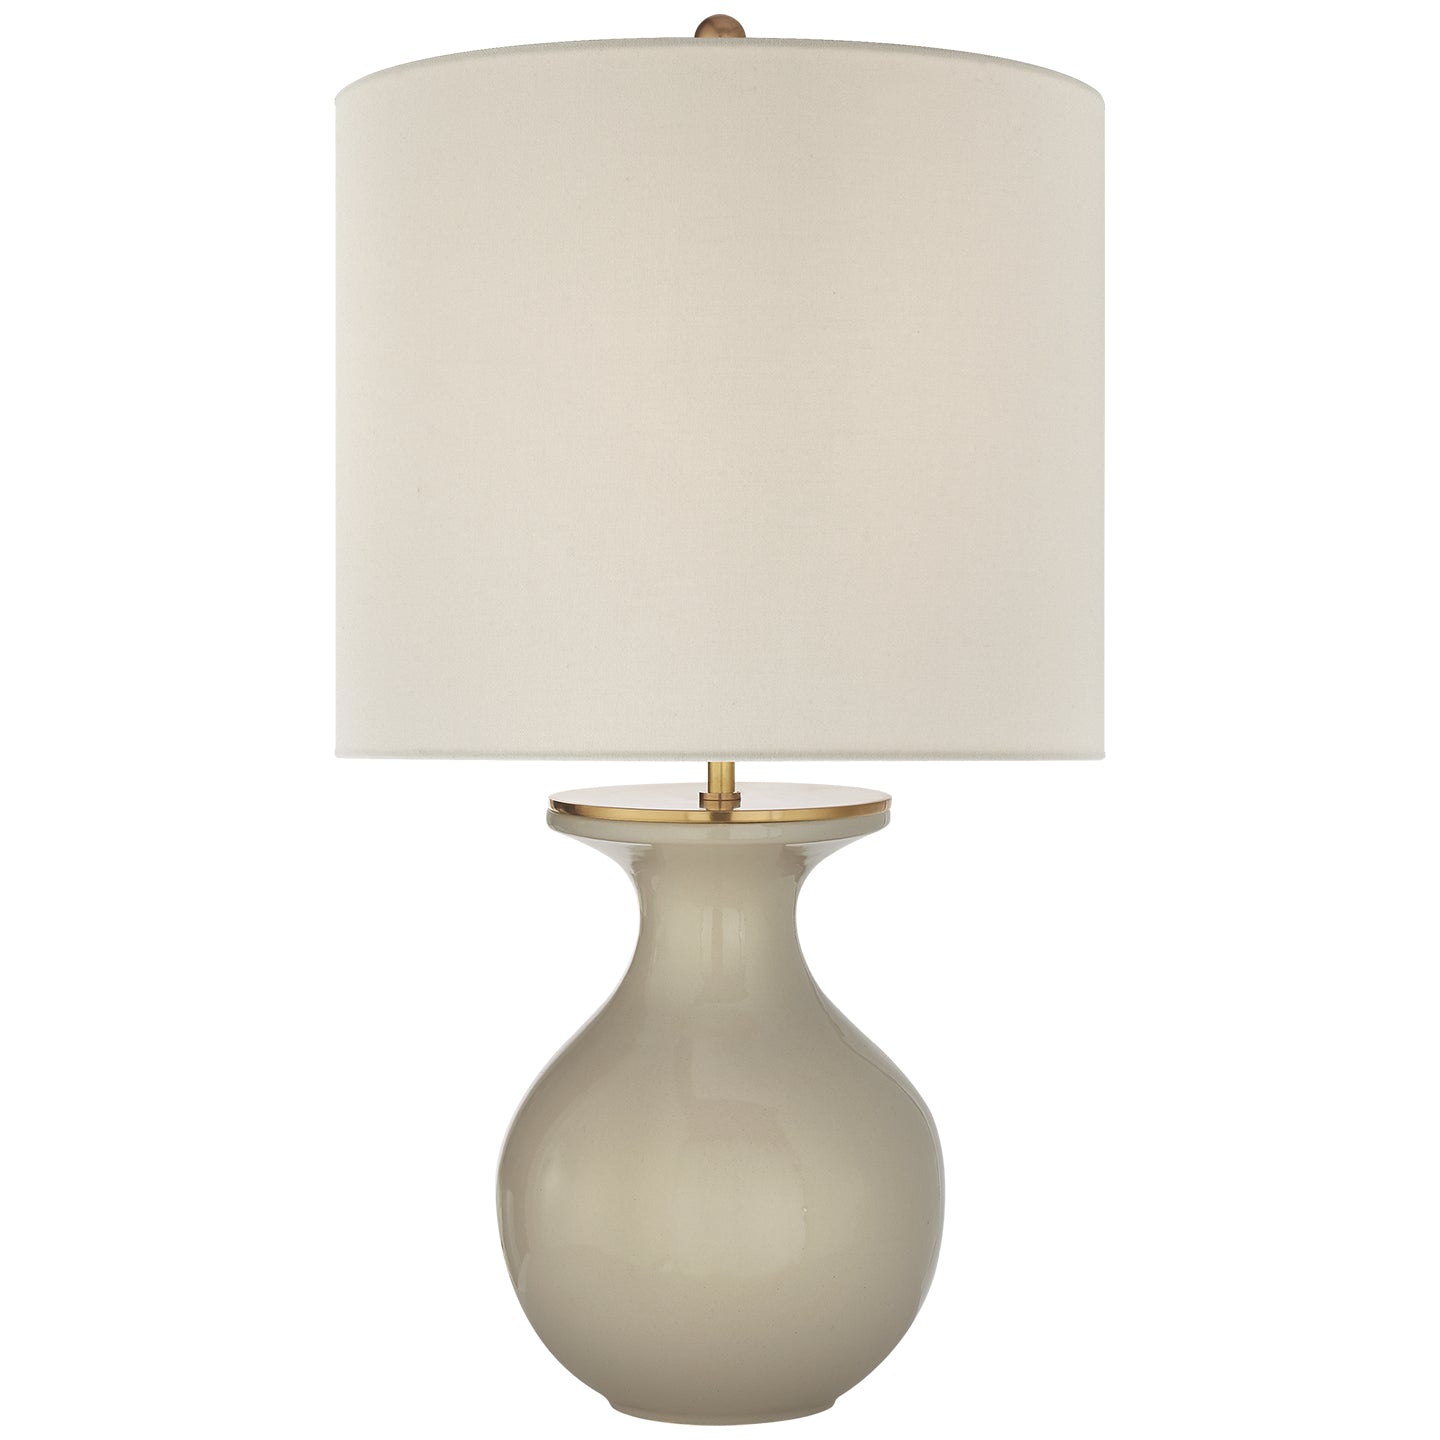 Load image into Gallery viewer, Visual Comfort Signature - KS 3616DVG-L - One Light Desk Lamp - Albie - Dove Grey
